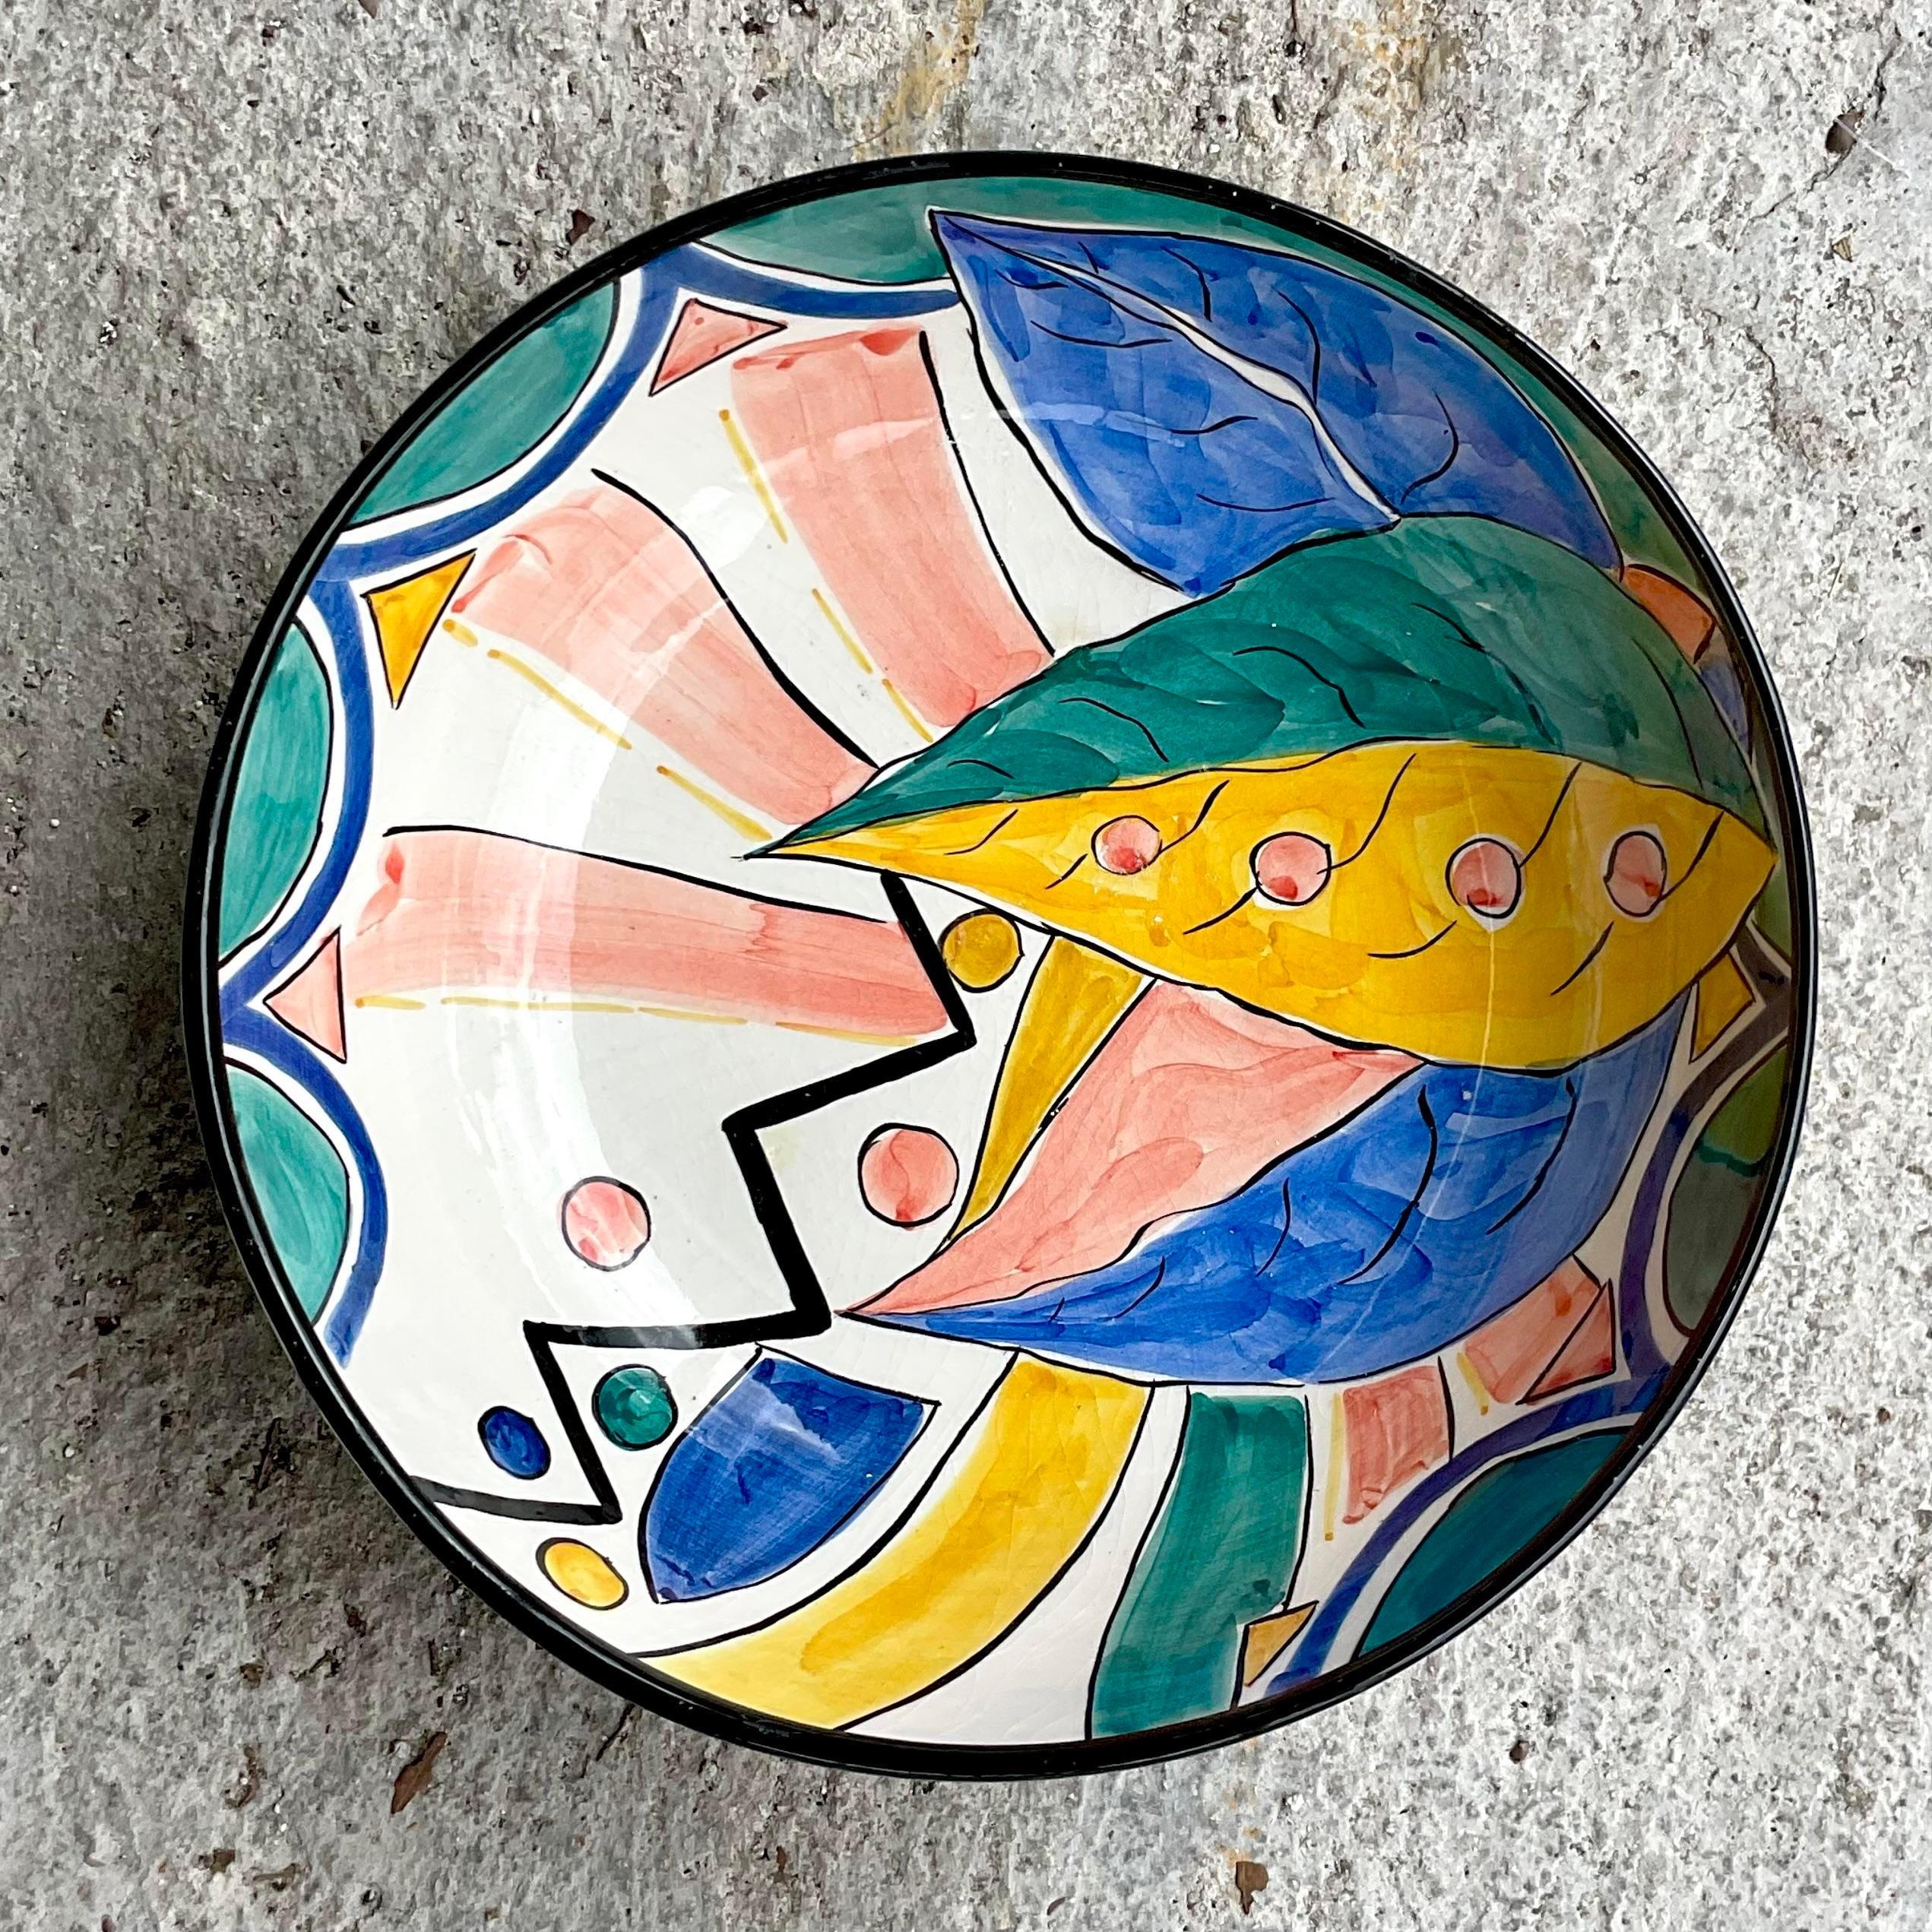 A fabulous vintage Boho hand painted bowl. Made by the Pereiras group in Portugal and stamped on the bottom. Brilliant colors and a glazed ceramic finish. Acquired from a Palm Beach estate.